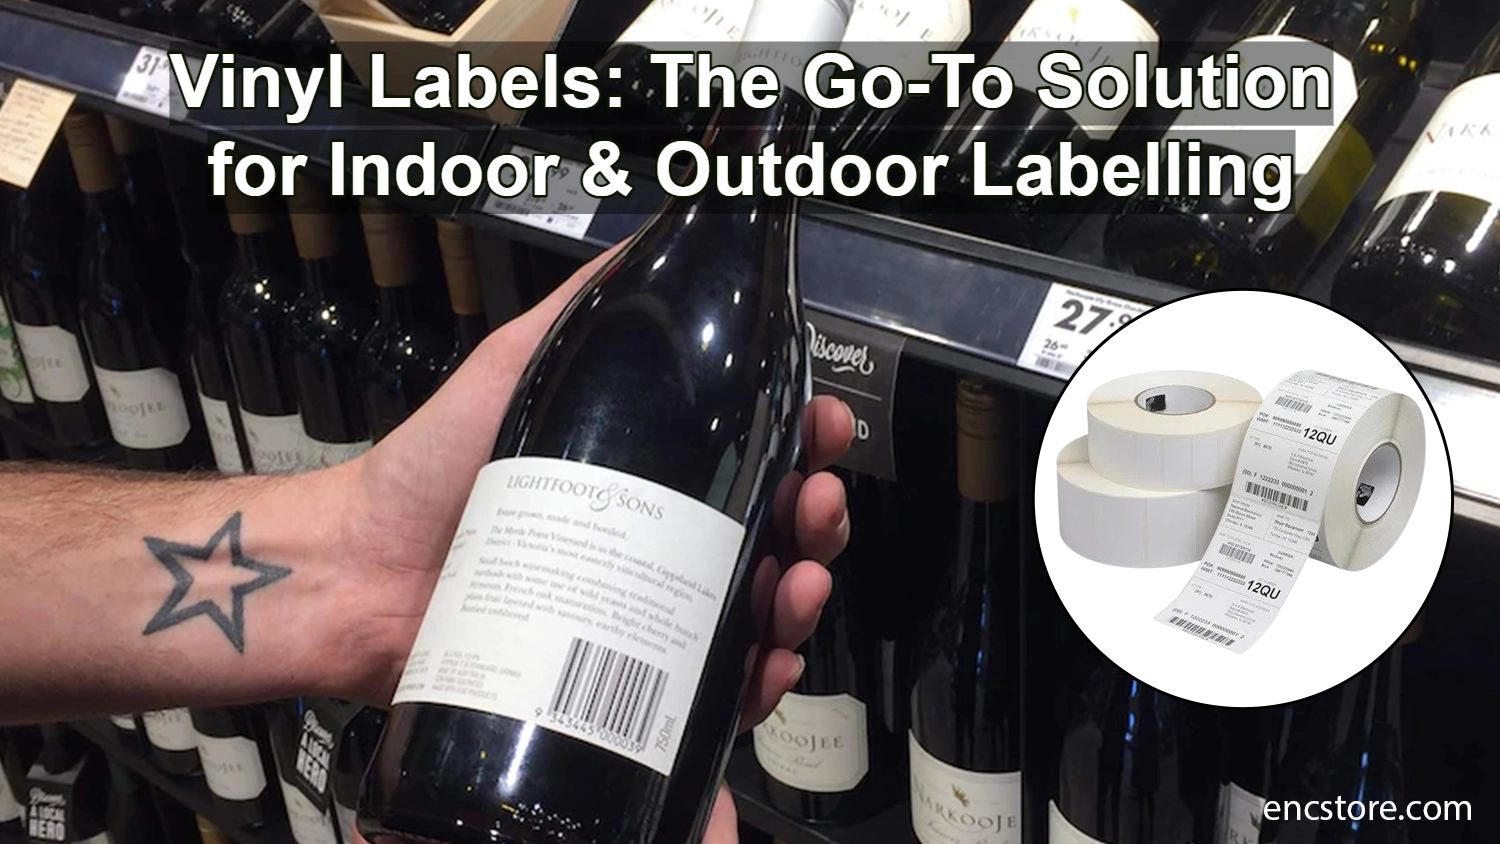 Vinyl Labels: The Go-To Solution for Indoor & Outdoor Labelling